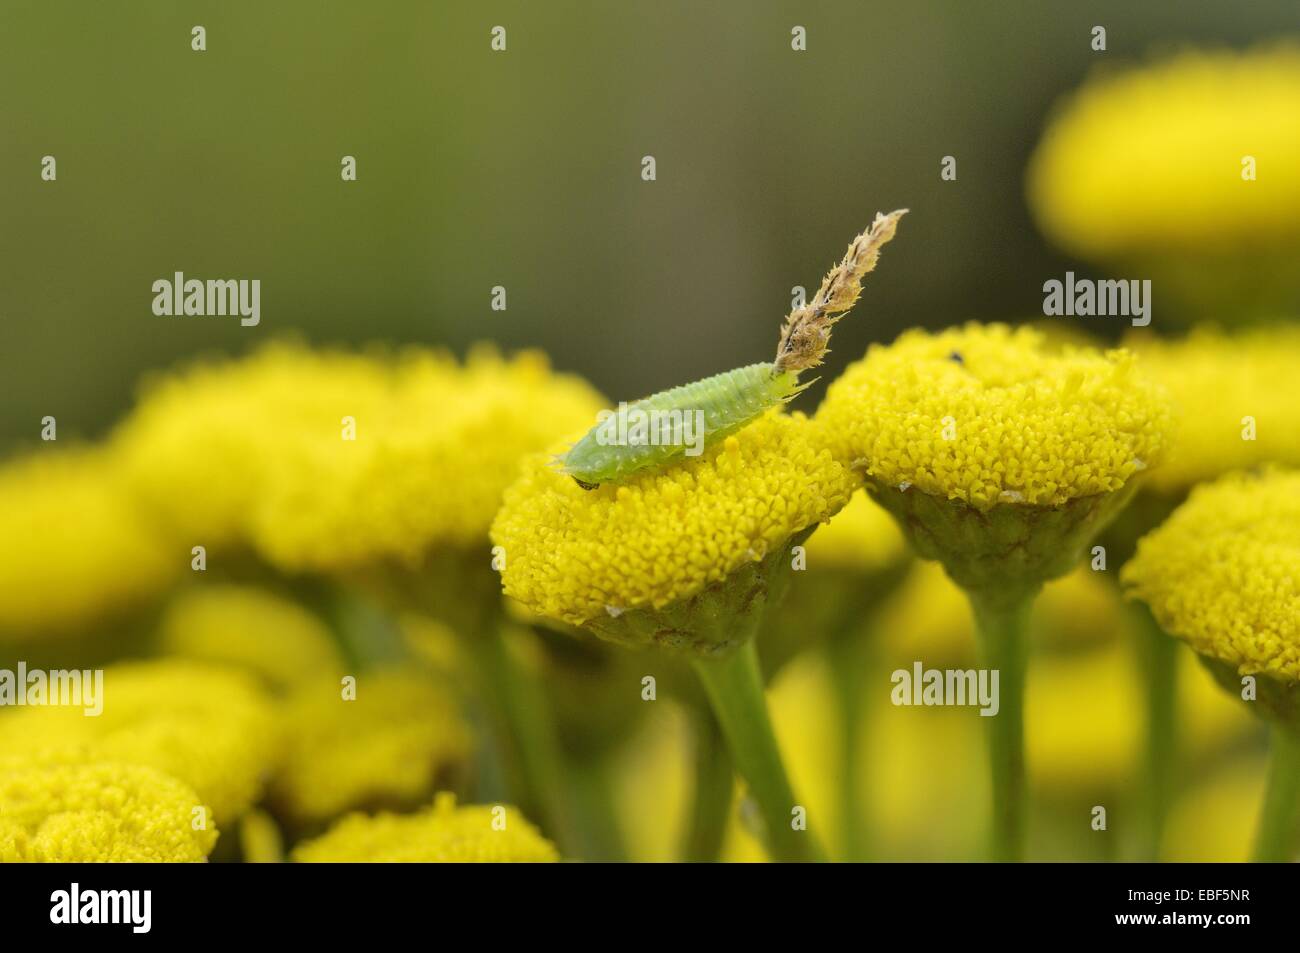 Tortoise Beetle - Leaf-mining Beetle (Cassida sp) larva carrying its exuviae like a tail on flower of Tansy(Tanacetum vulgare) Stock Photo